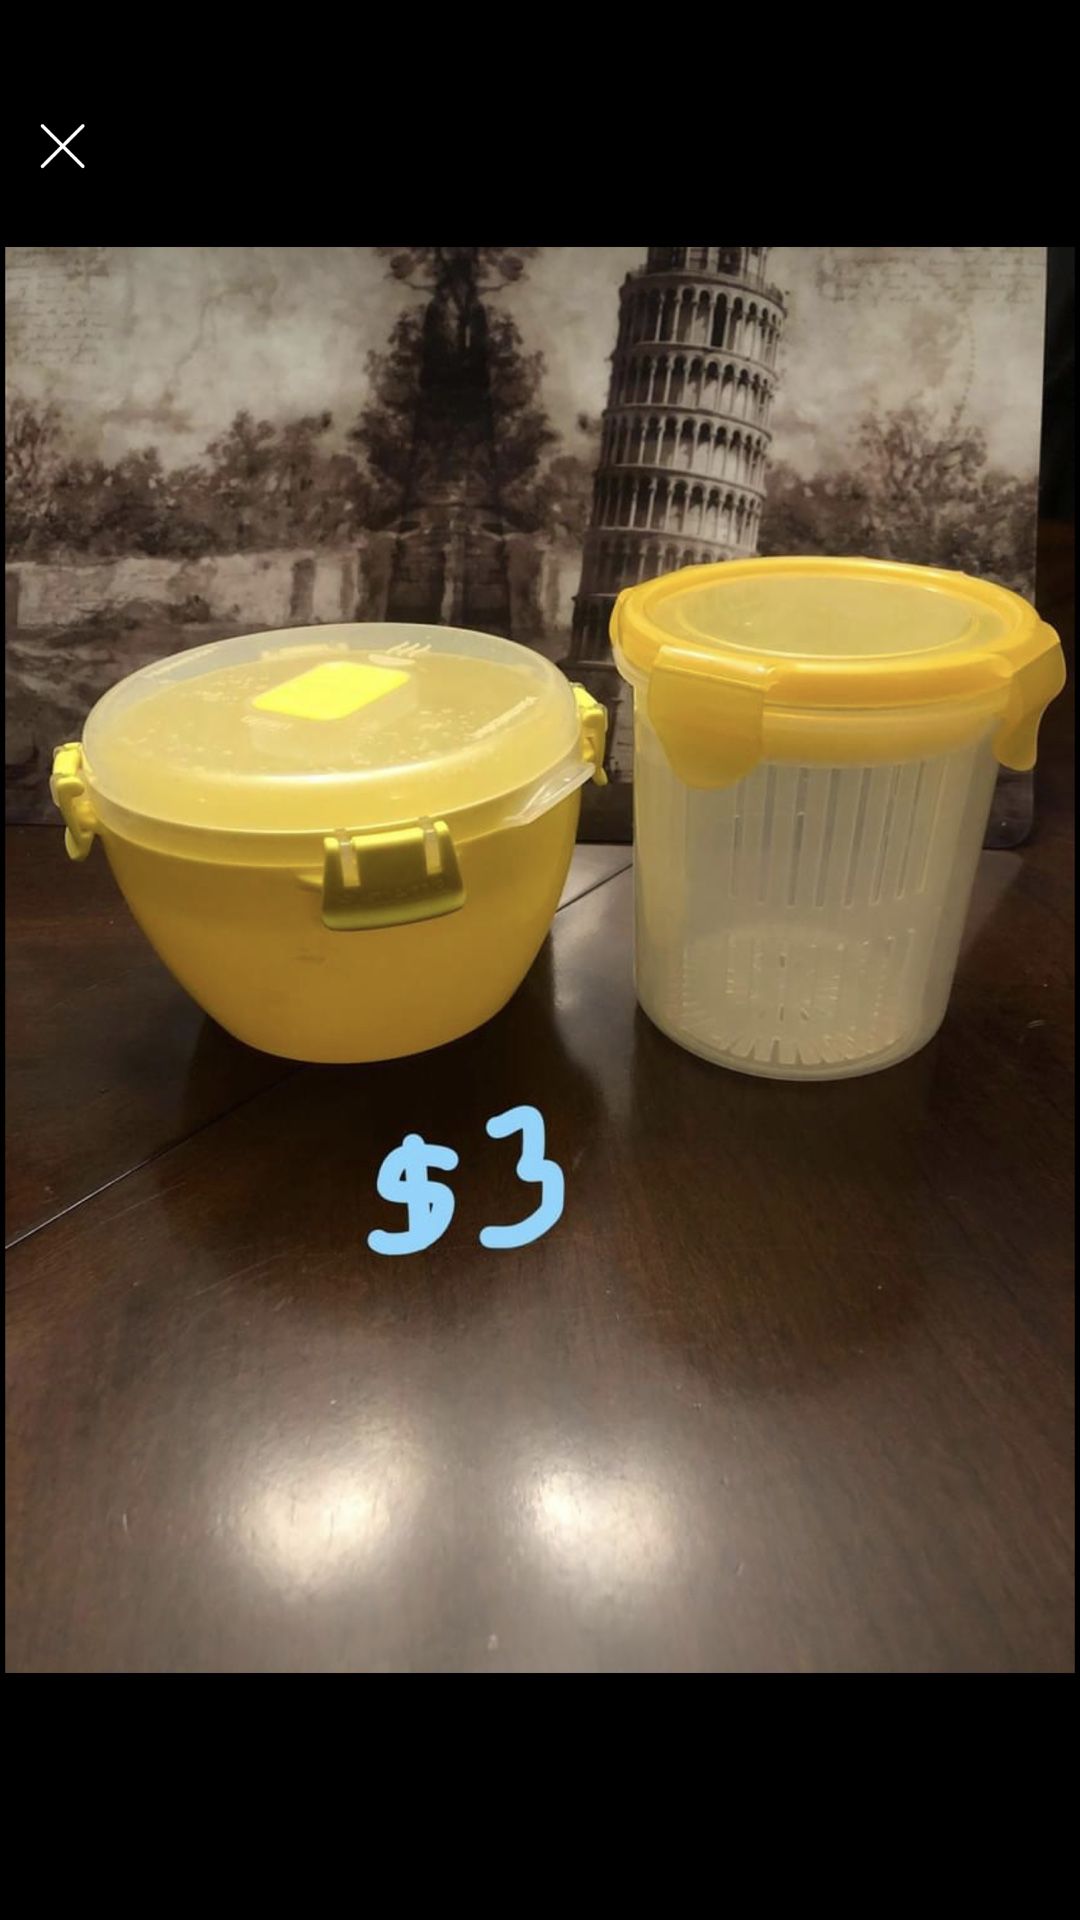 2 Storage Containers